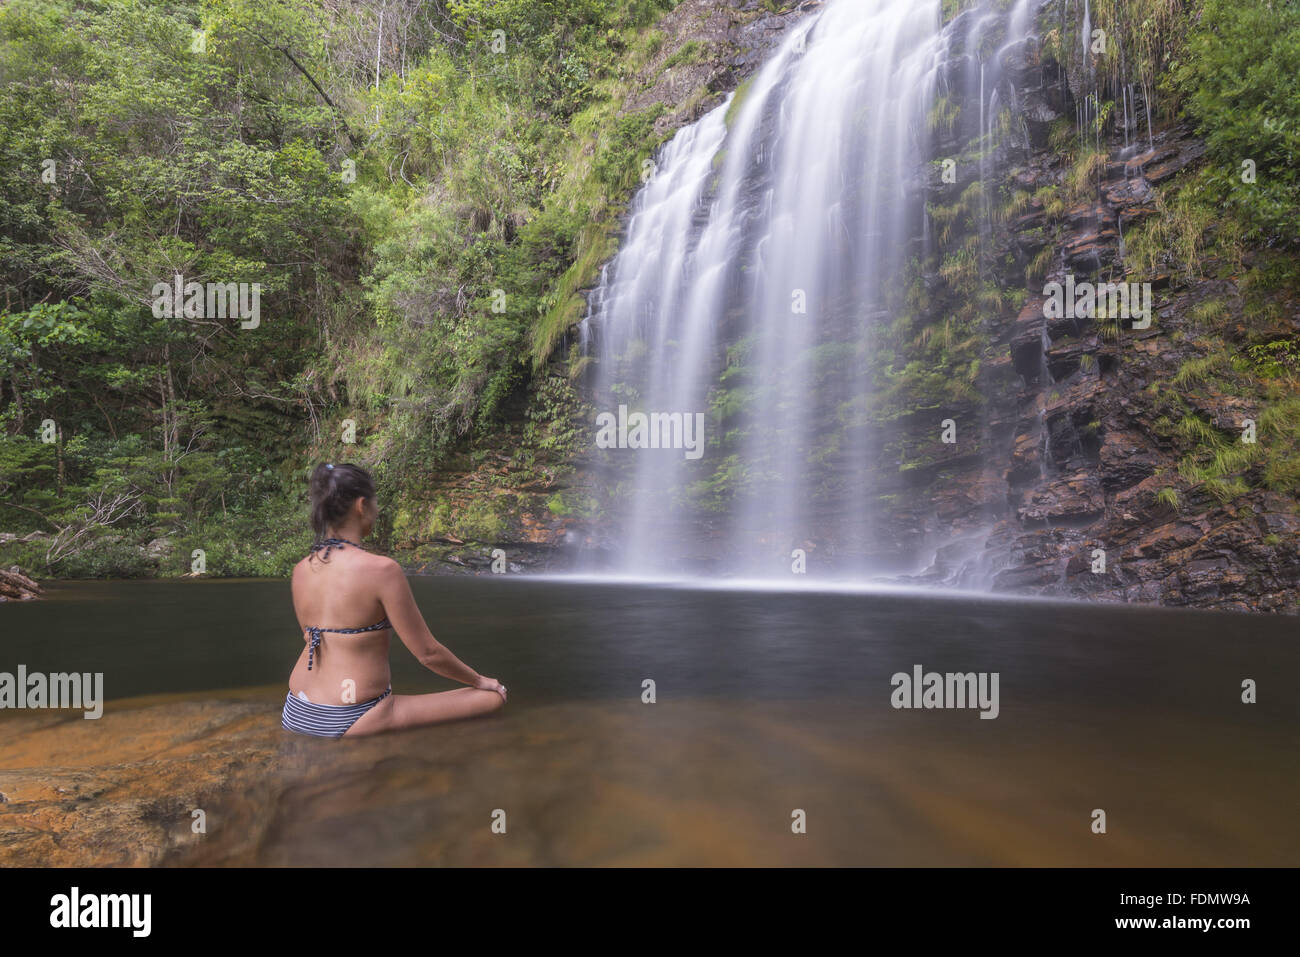 Tourist cooling down in Farofa Waterfall in the Serra do Cipo National Park Stock Photo